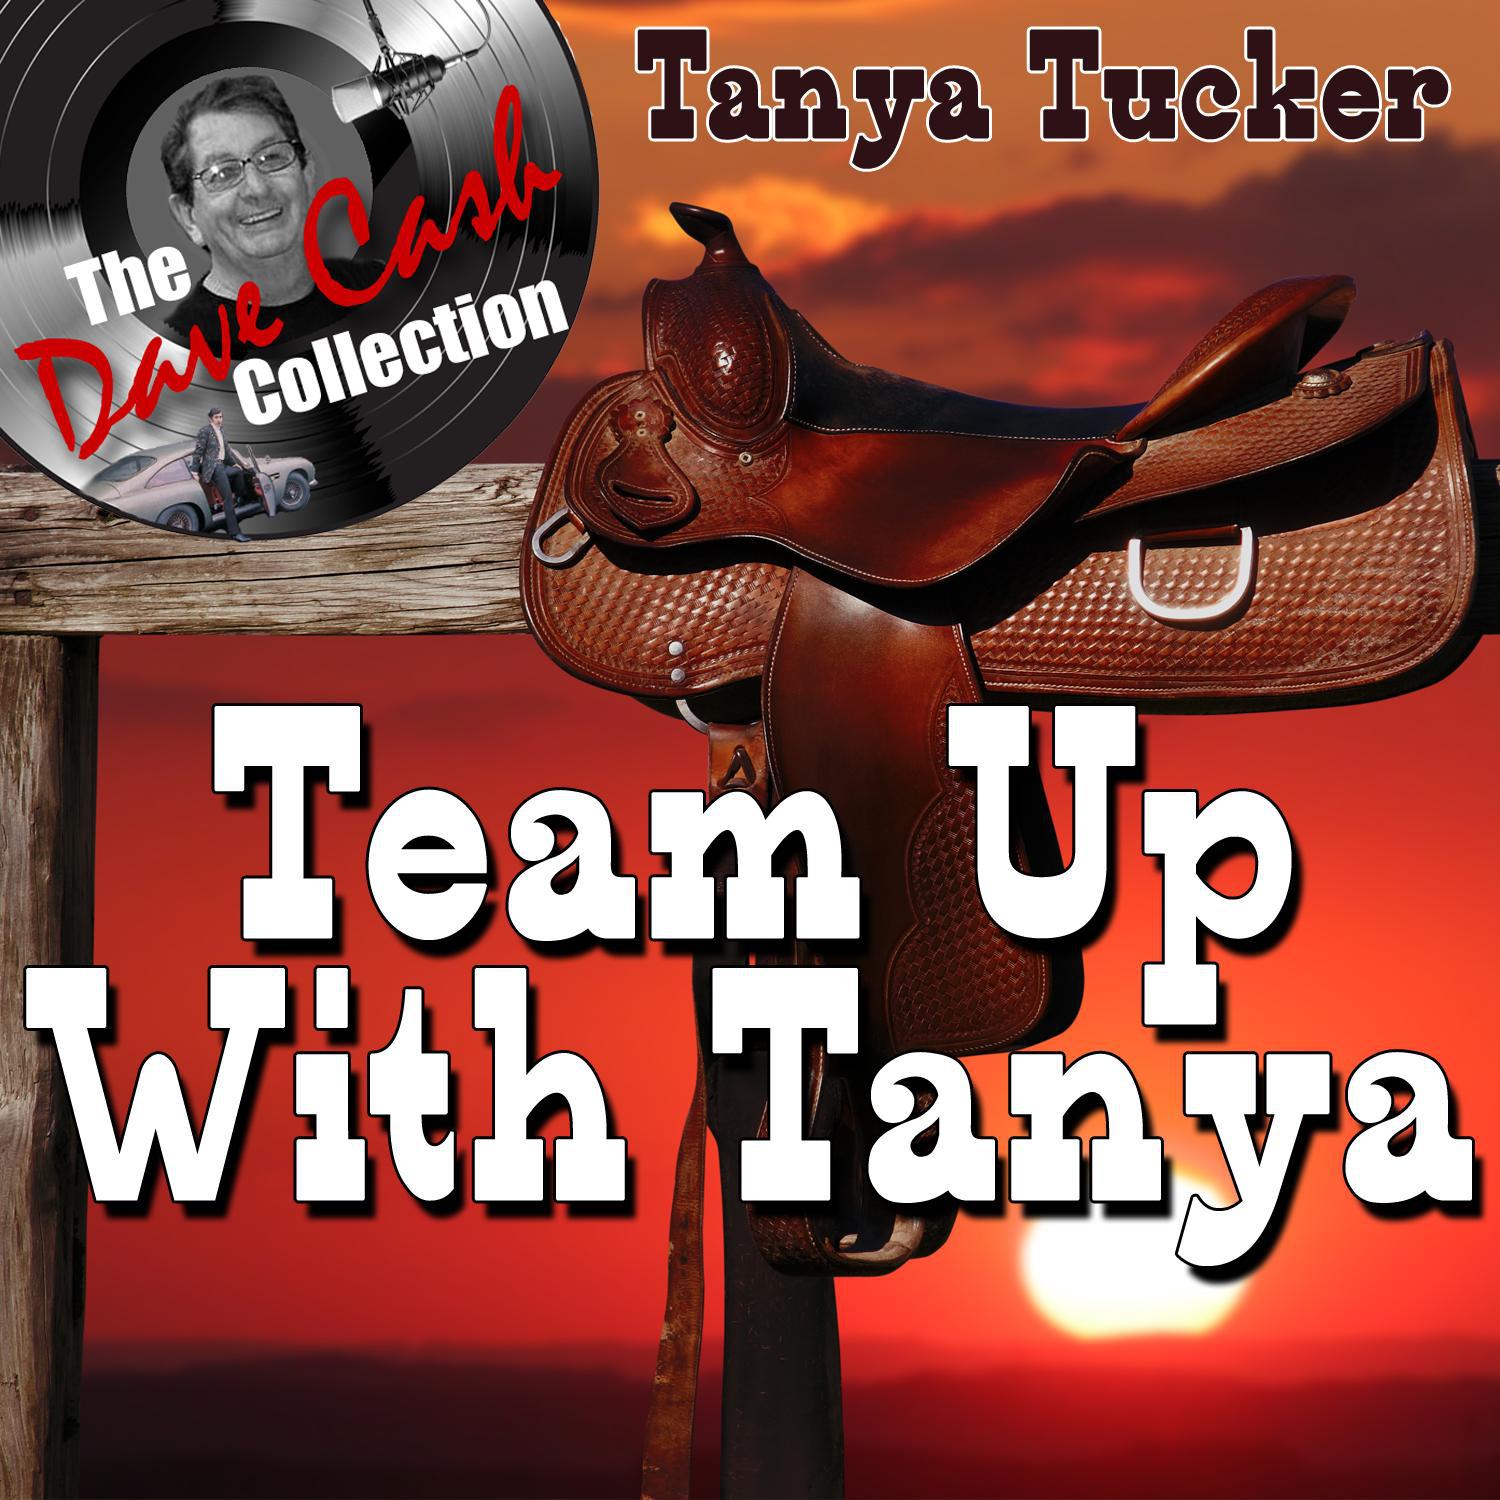 Team Up With Tanya - [The Dave Cash Collection]专辑